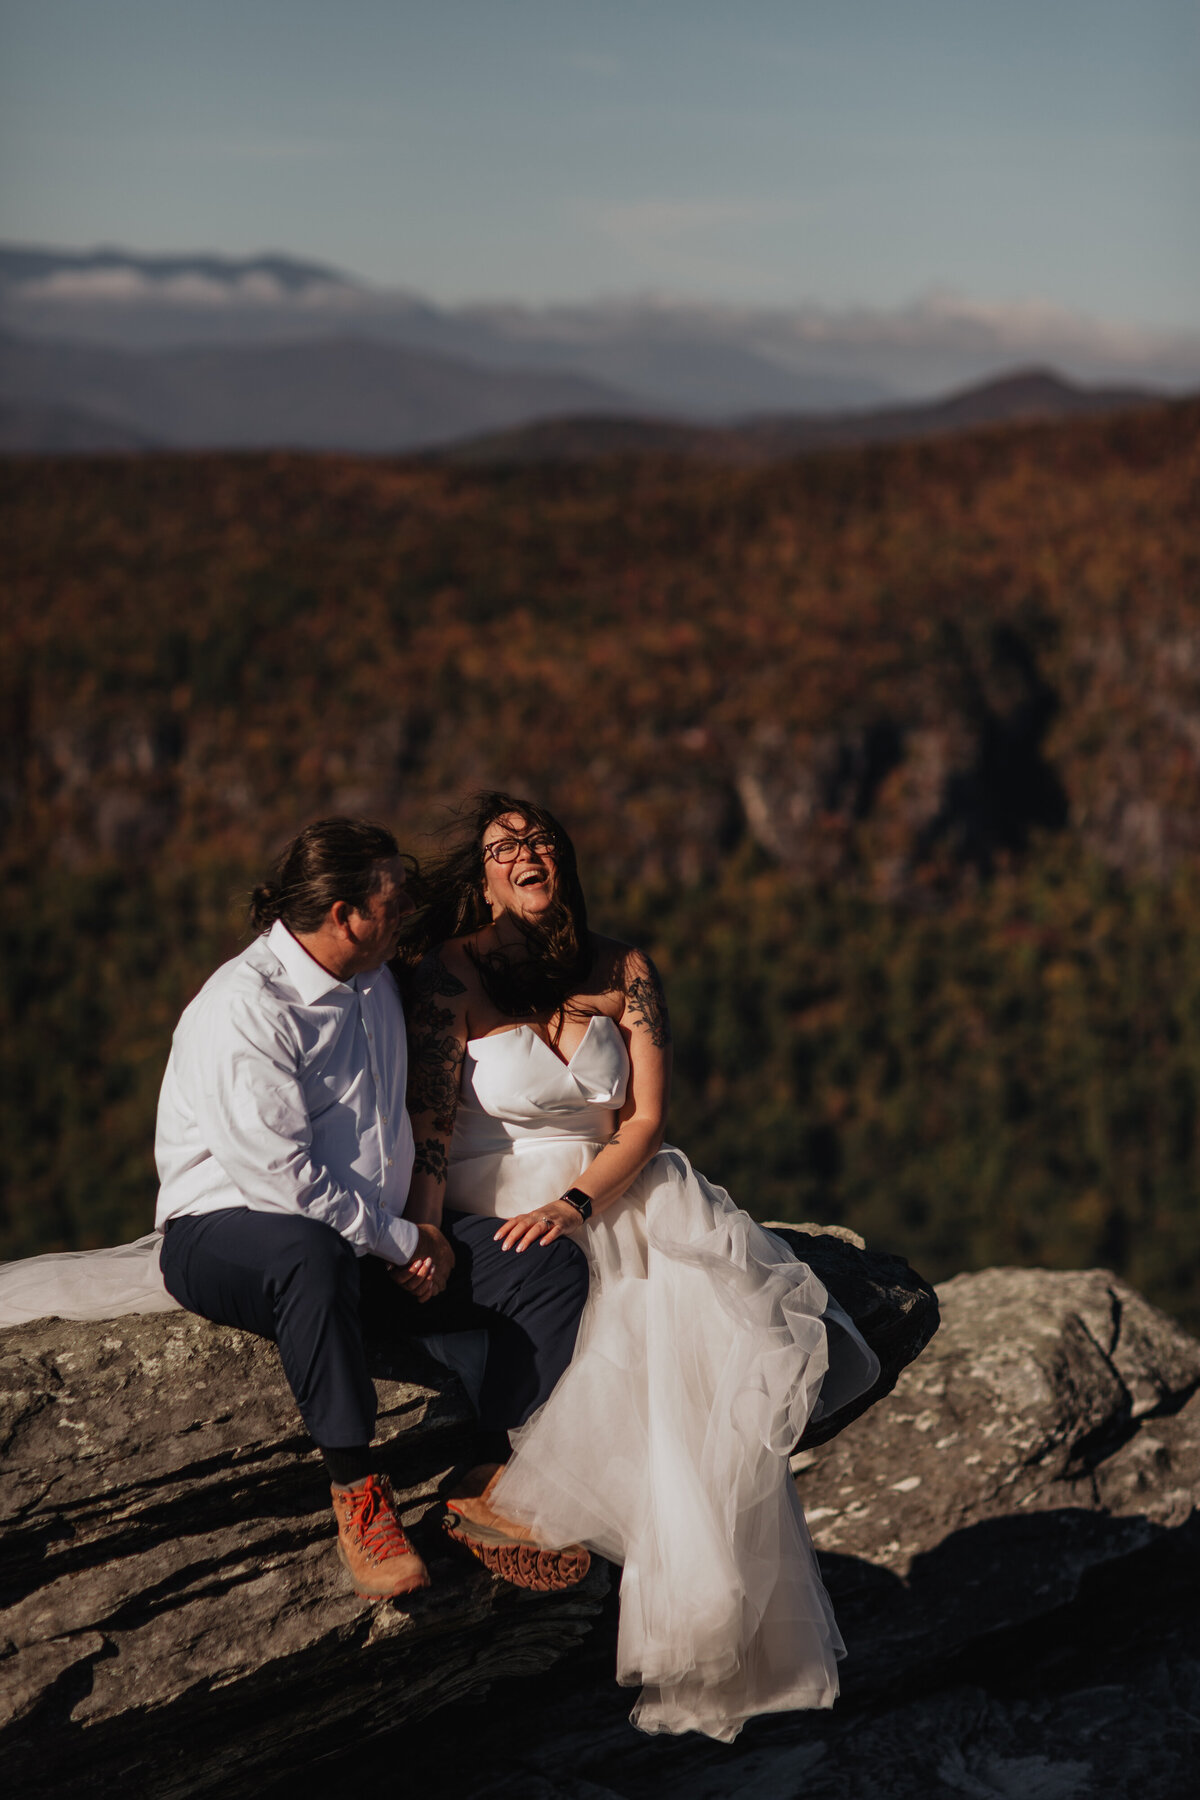 Adventure elopement at Hawksbill Mountain Trail in Pisgah National Forest in North Carolina photographed by Magnolia and Ember.